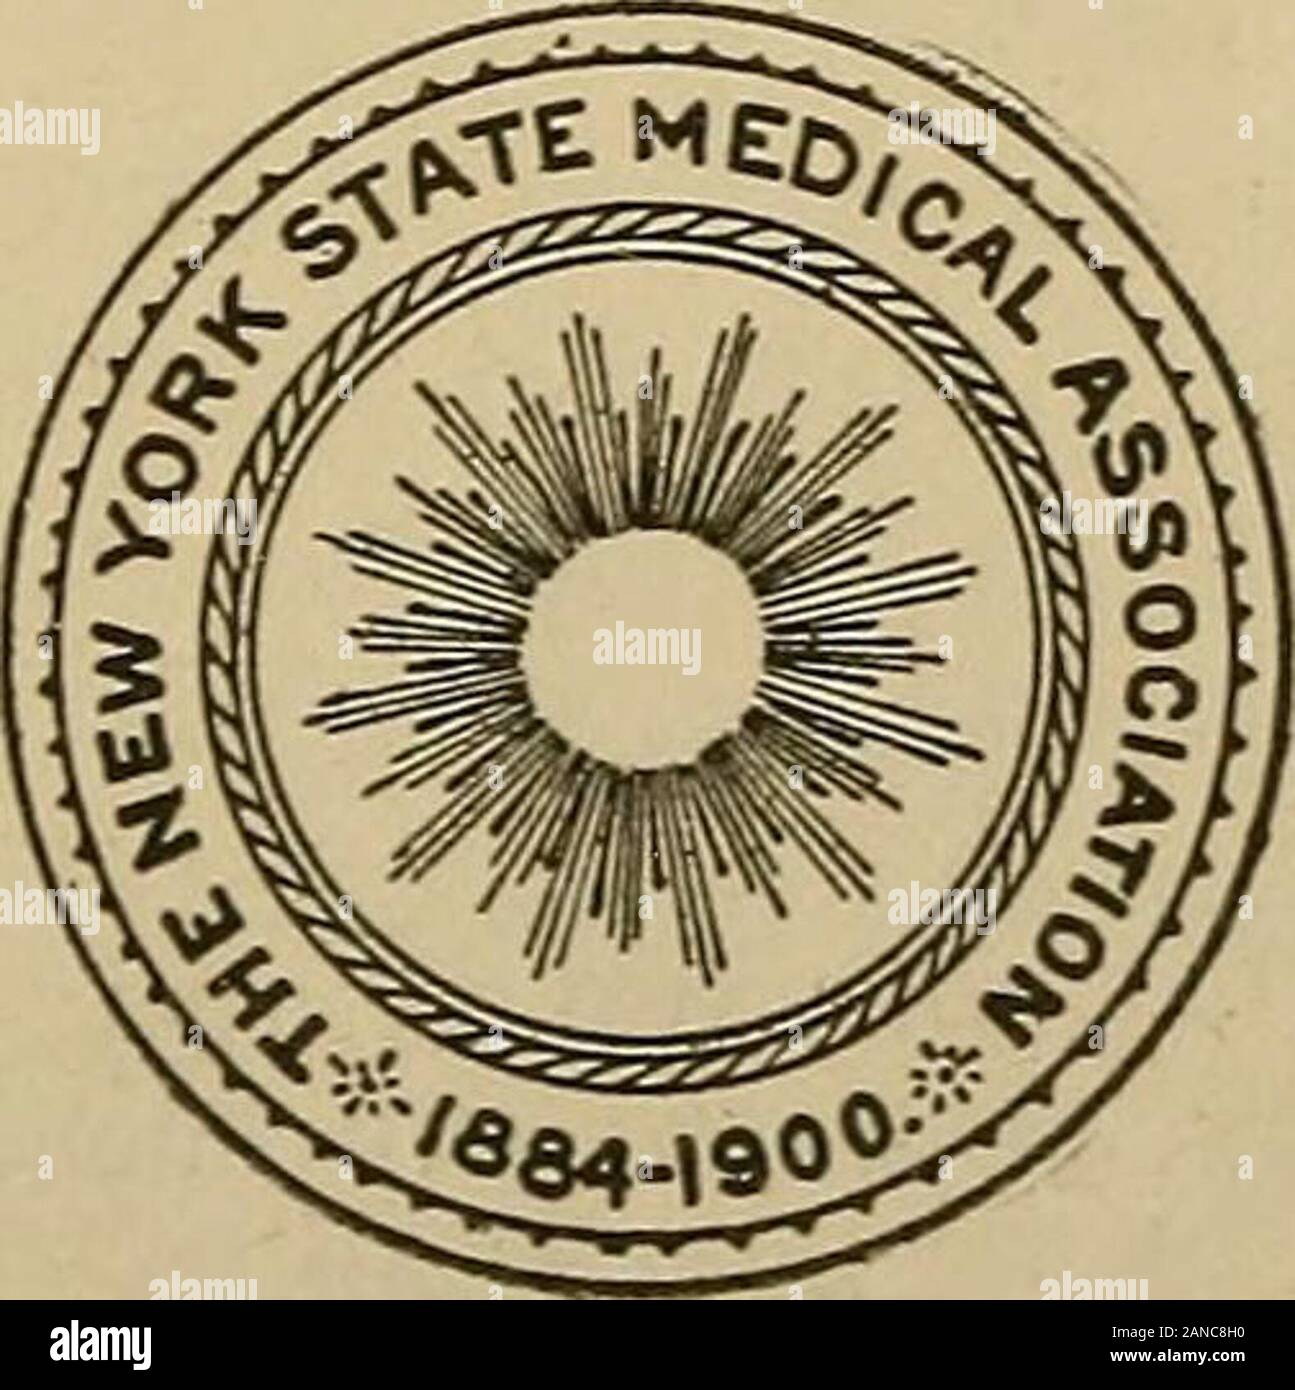 Medical directory of New York, New Jersey and Connecticut . ^ similarpublications of its class nearly ninety per cent, ofits space is devoted to pure science. Members ofthe Association receive a free copy ; others mayobtain the book from the Treasurer, Dr. E. H.Squibb, P. O. Box 760, Brooklyn, N. Y. Price $5.00per copy. Vhc jVIcdical Directory of)N[ew ork^ ]Vcw jf^^seyand Connecticut This Directory is given to the members of the NewYork State Medical Association, and to those ofthe New York and Kings County Medical Associa-tions. It may be purchased from G. P. PutnamsSons, 27 and 29 West 23d Stock Photo